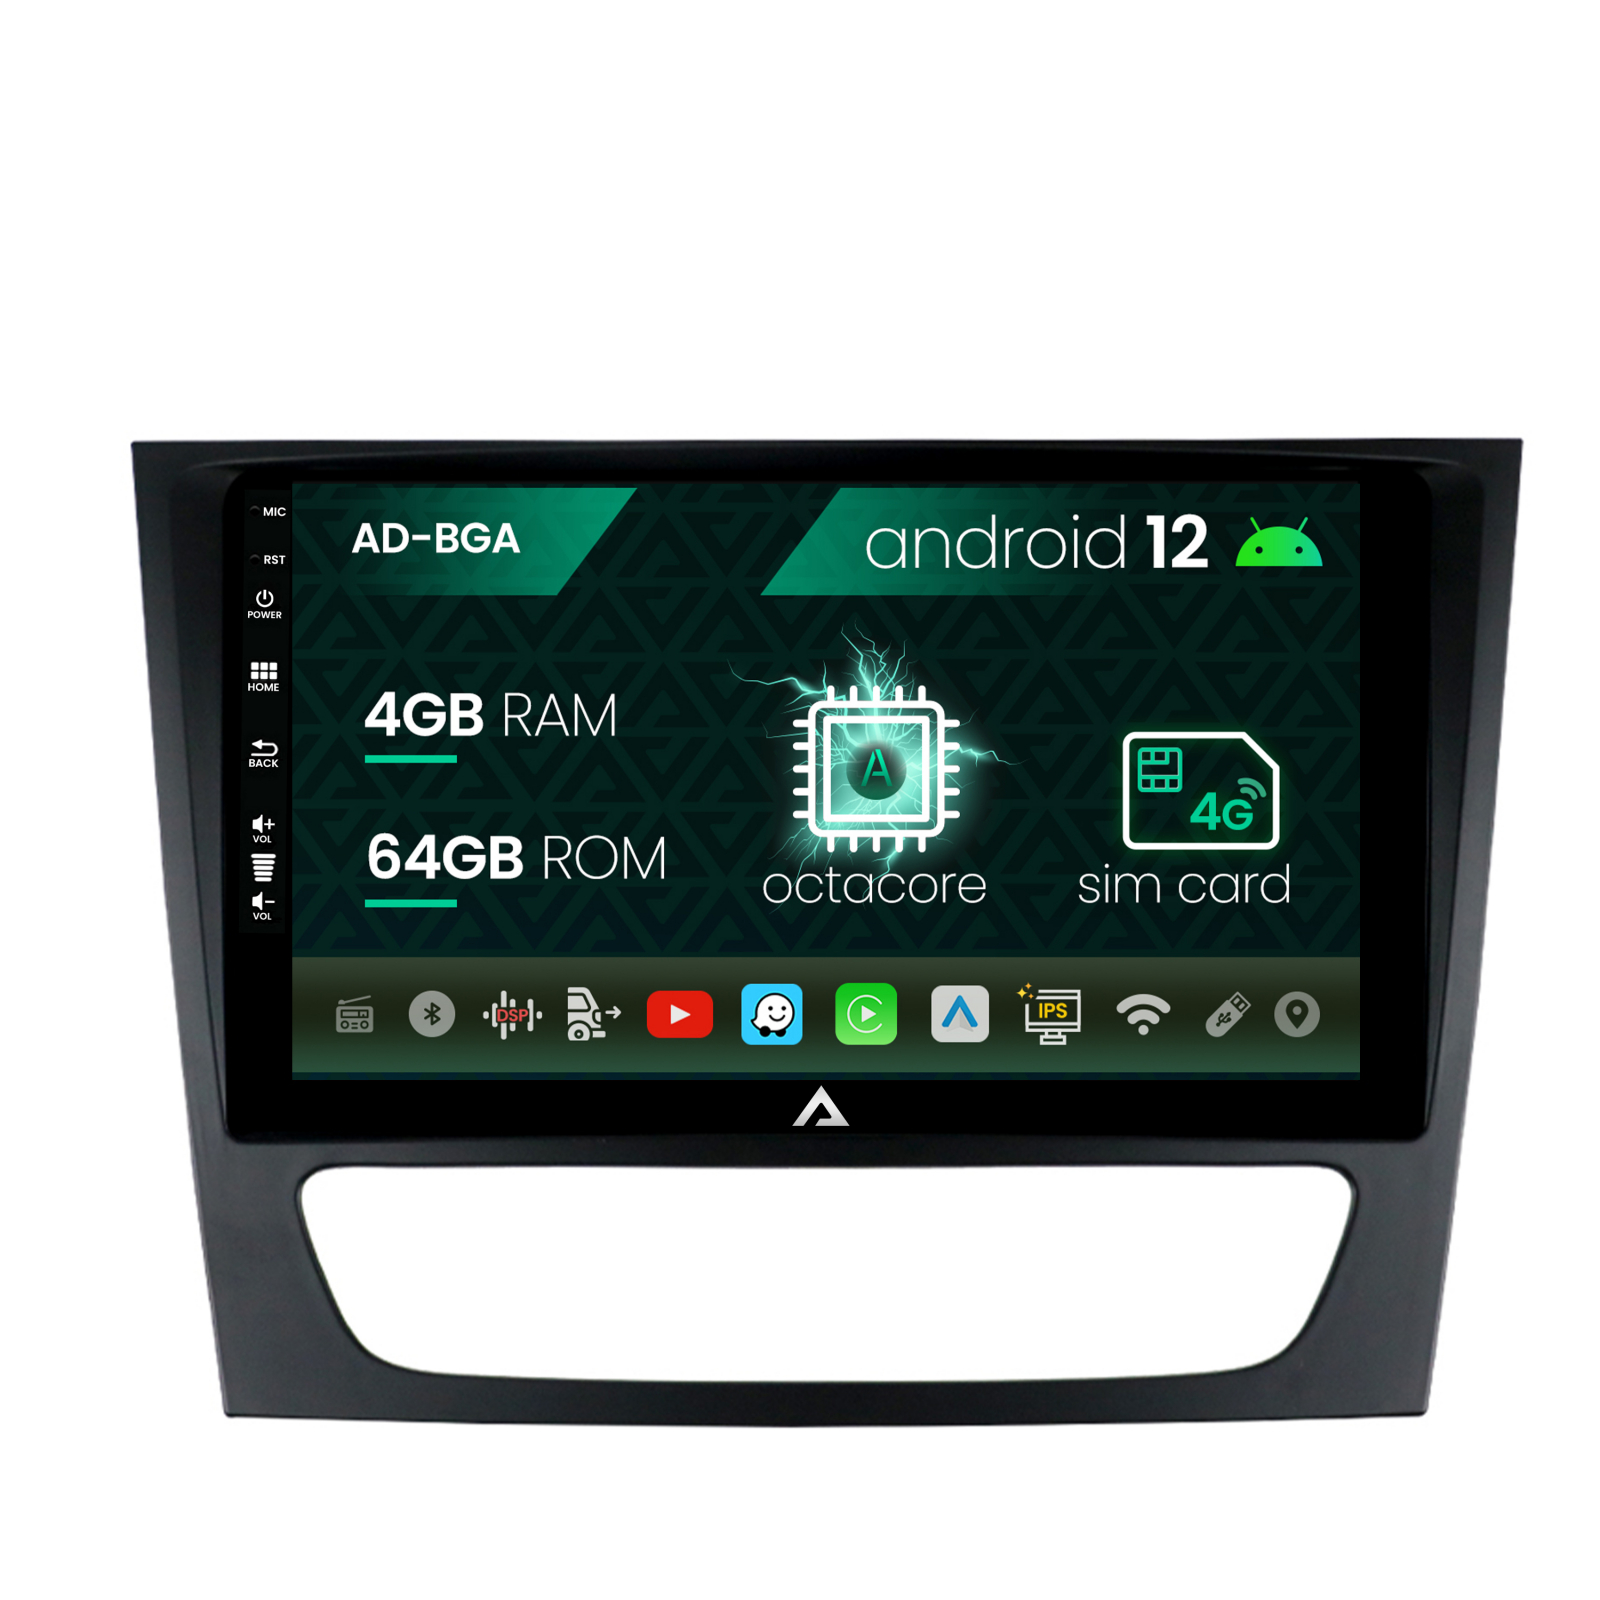 Navigatie Mercedes Benz W211/CLS, Android 12, A-Octacore / 4GB RAM + 64GB ROM, 9 Inch - AD-BGA9004+AD-BGRKIT415